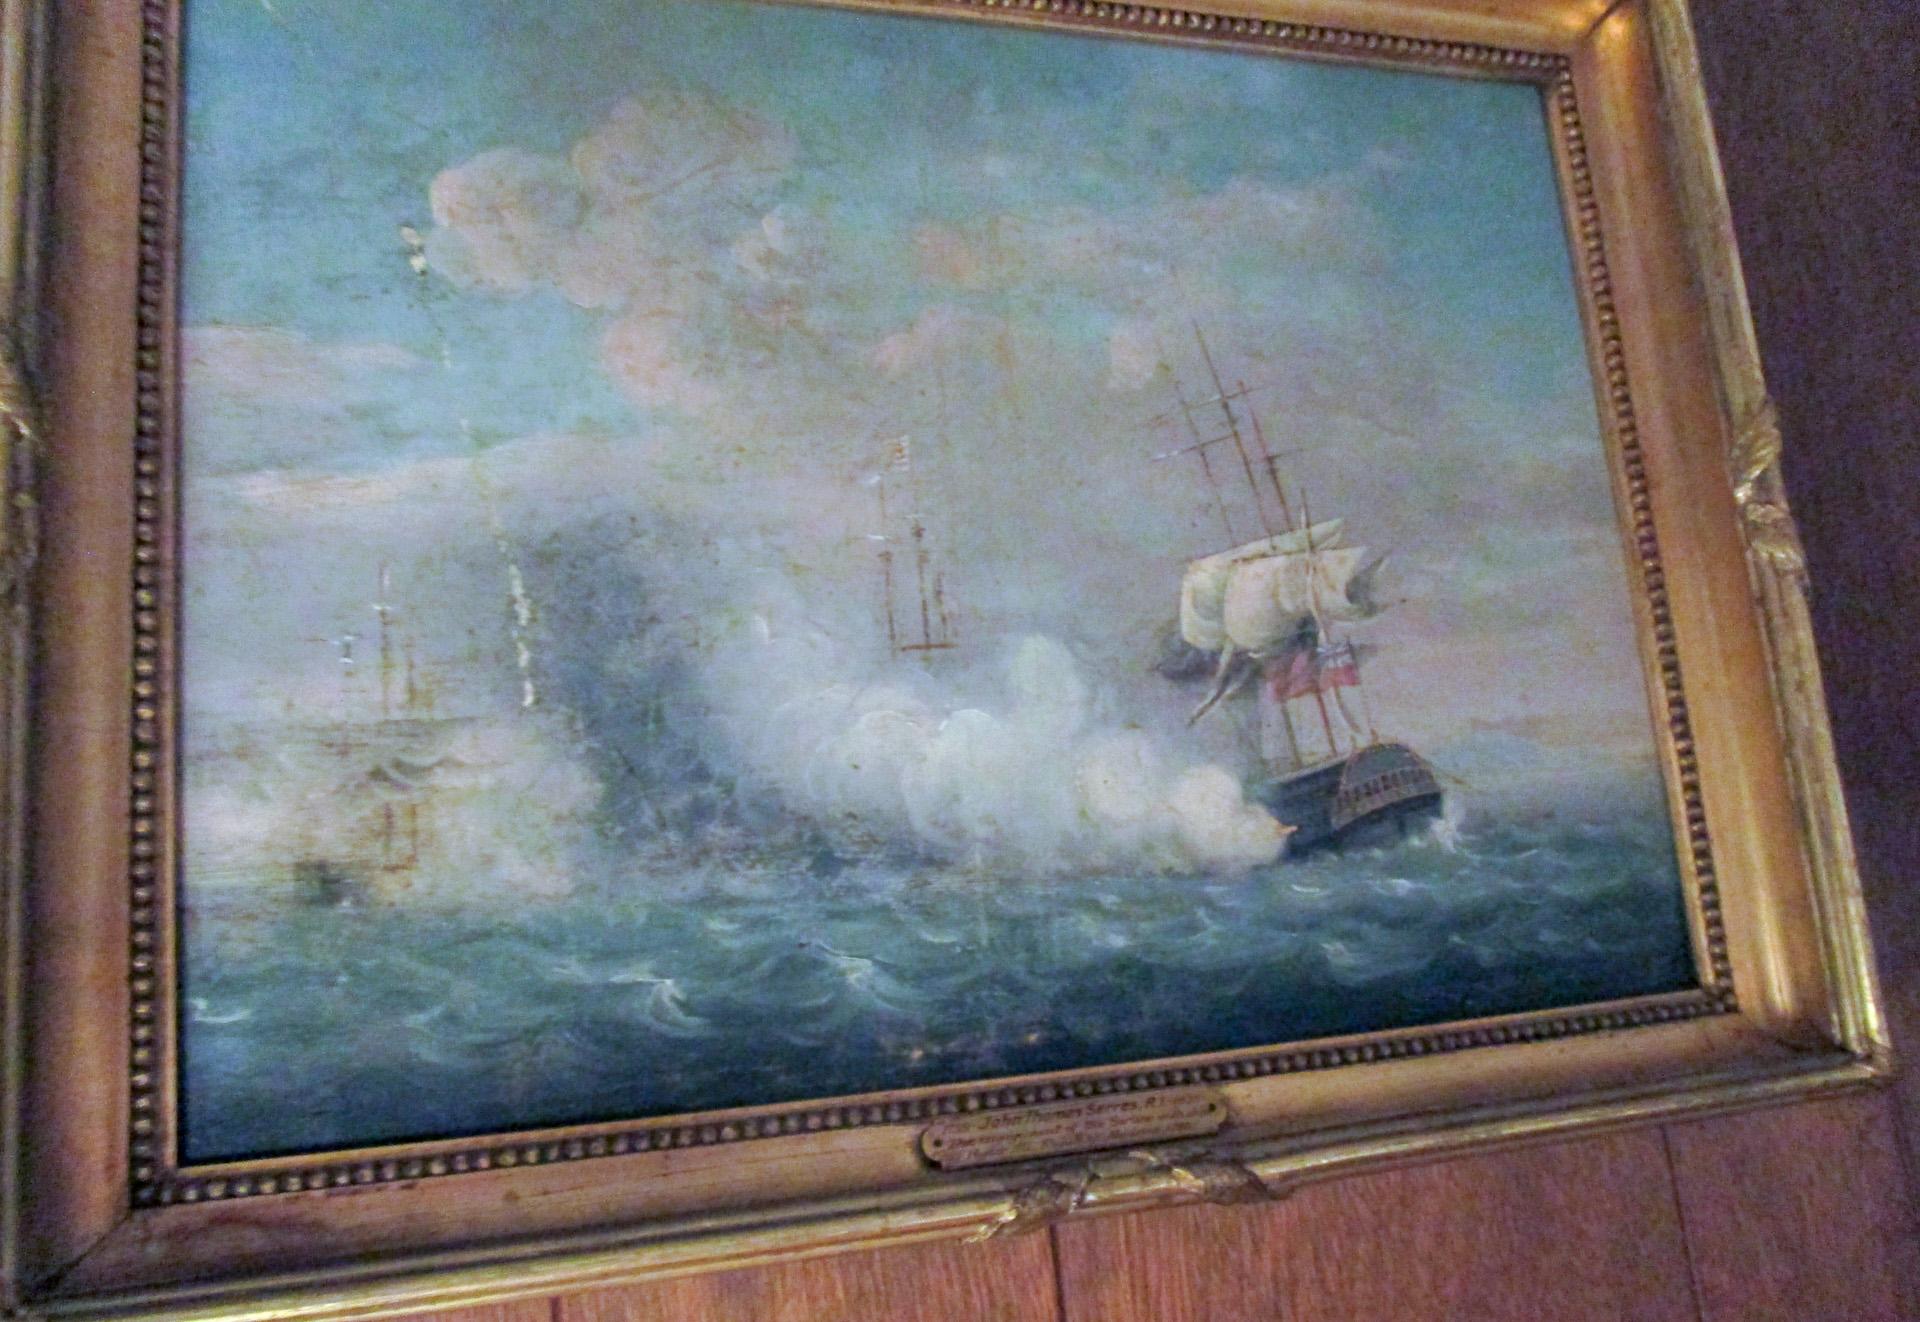 18th c Historical English India Naval Battle Oil Painting by John Thomas Serres For Sale 2